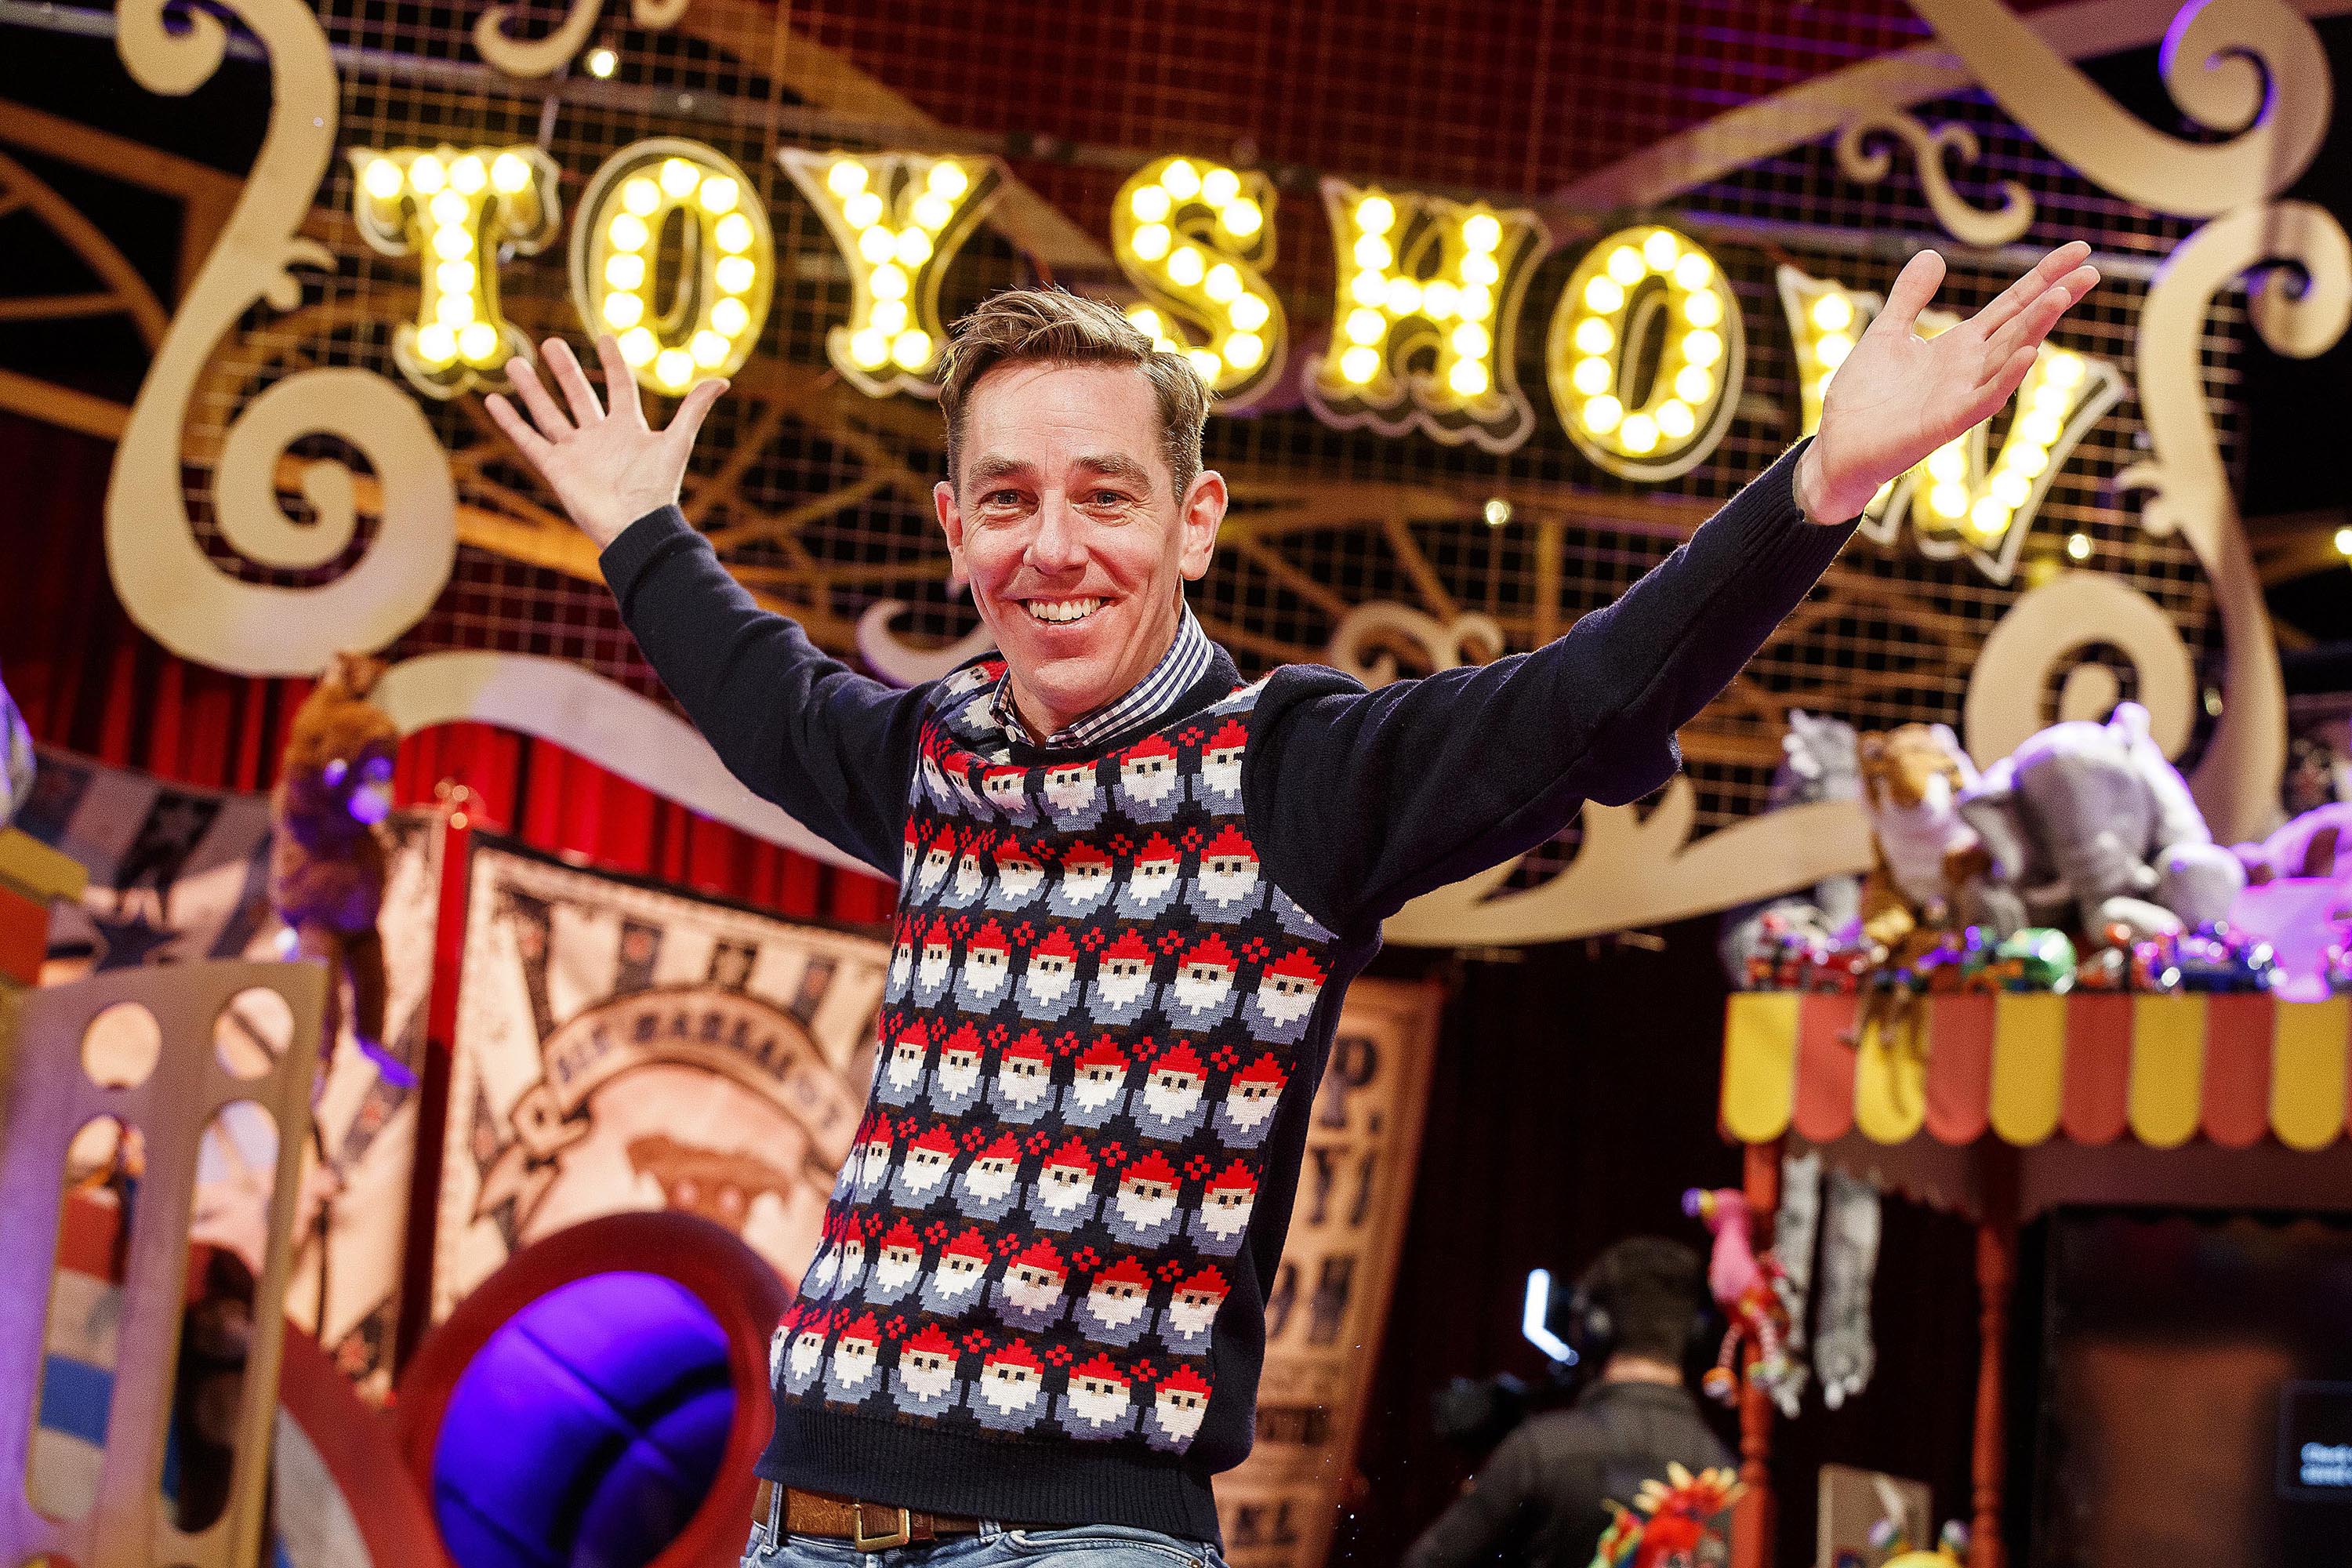 Ryan Tubridy just revealed the official date for the Late Late TOY SHOW 2019